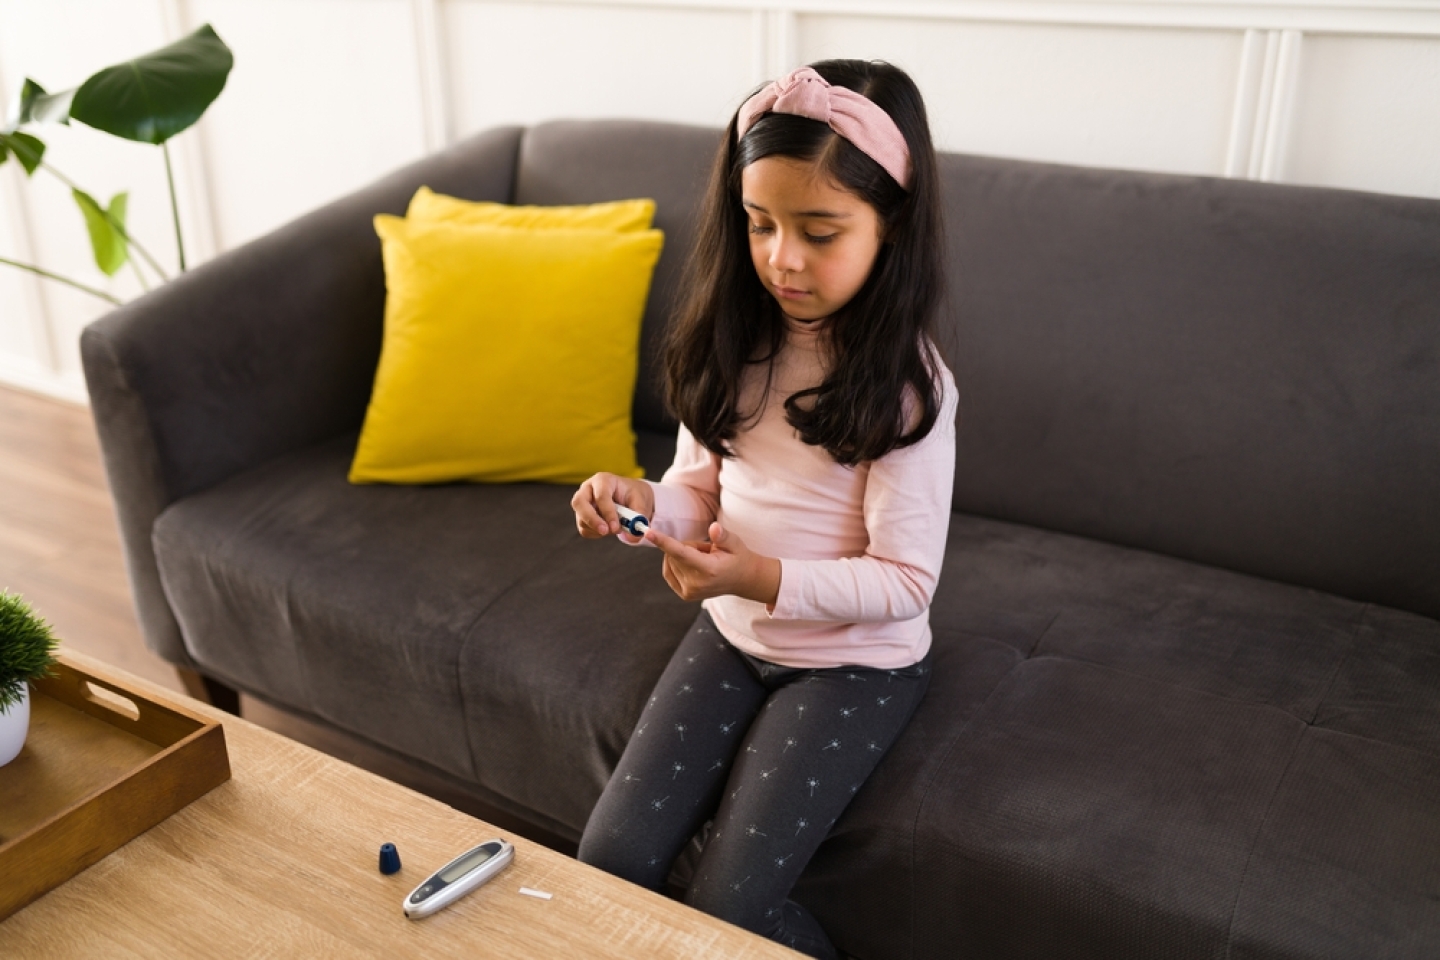 Young girl with diabetes type 1 checking her glucose levels with a blood test monitor at home